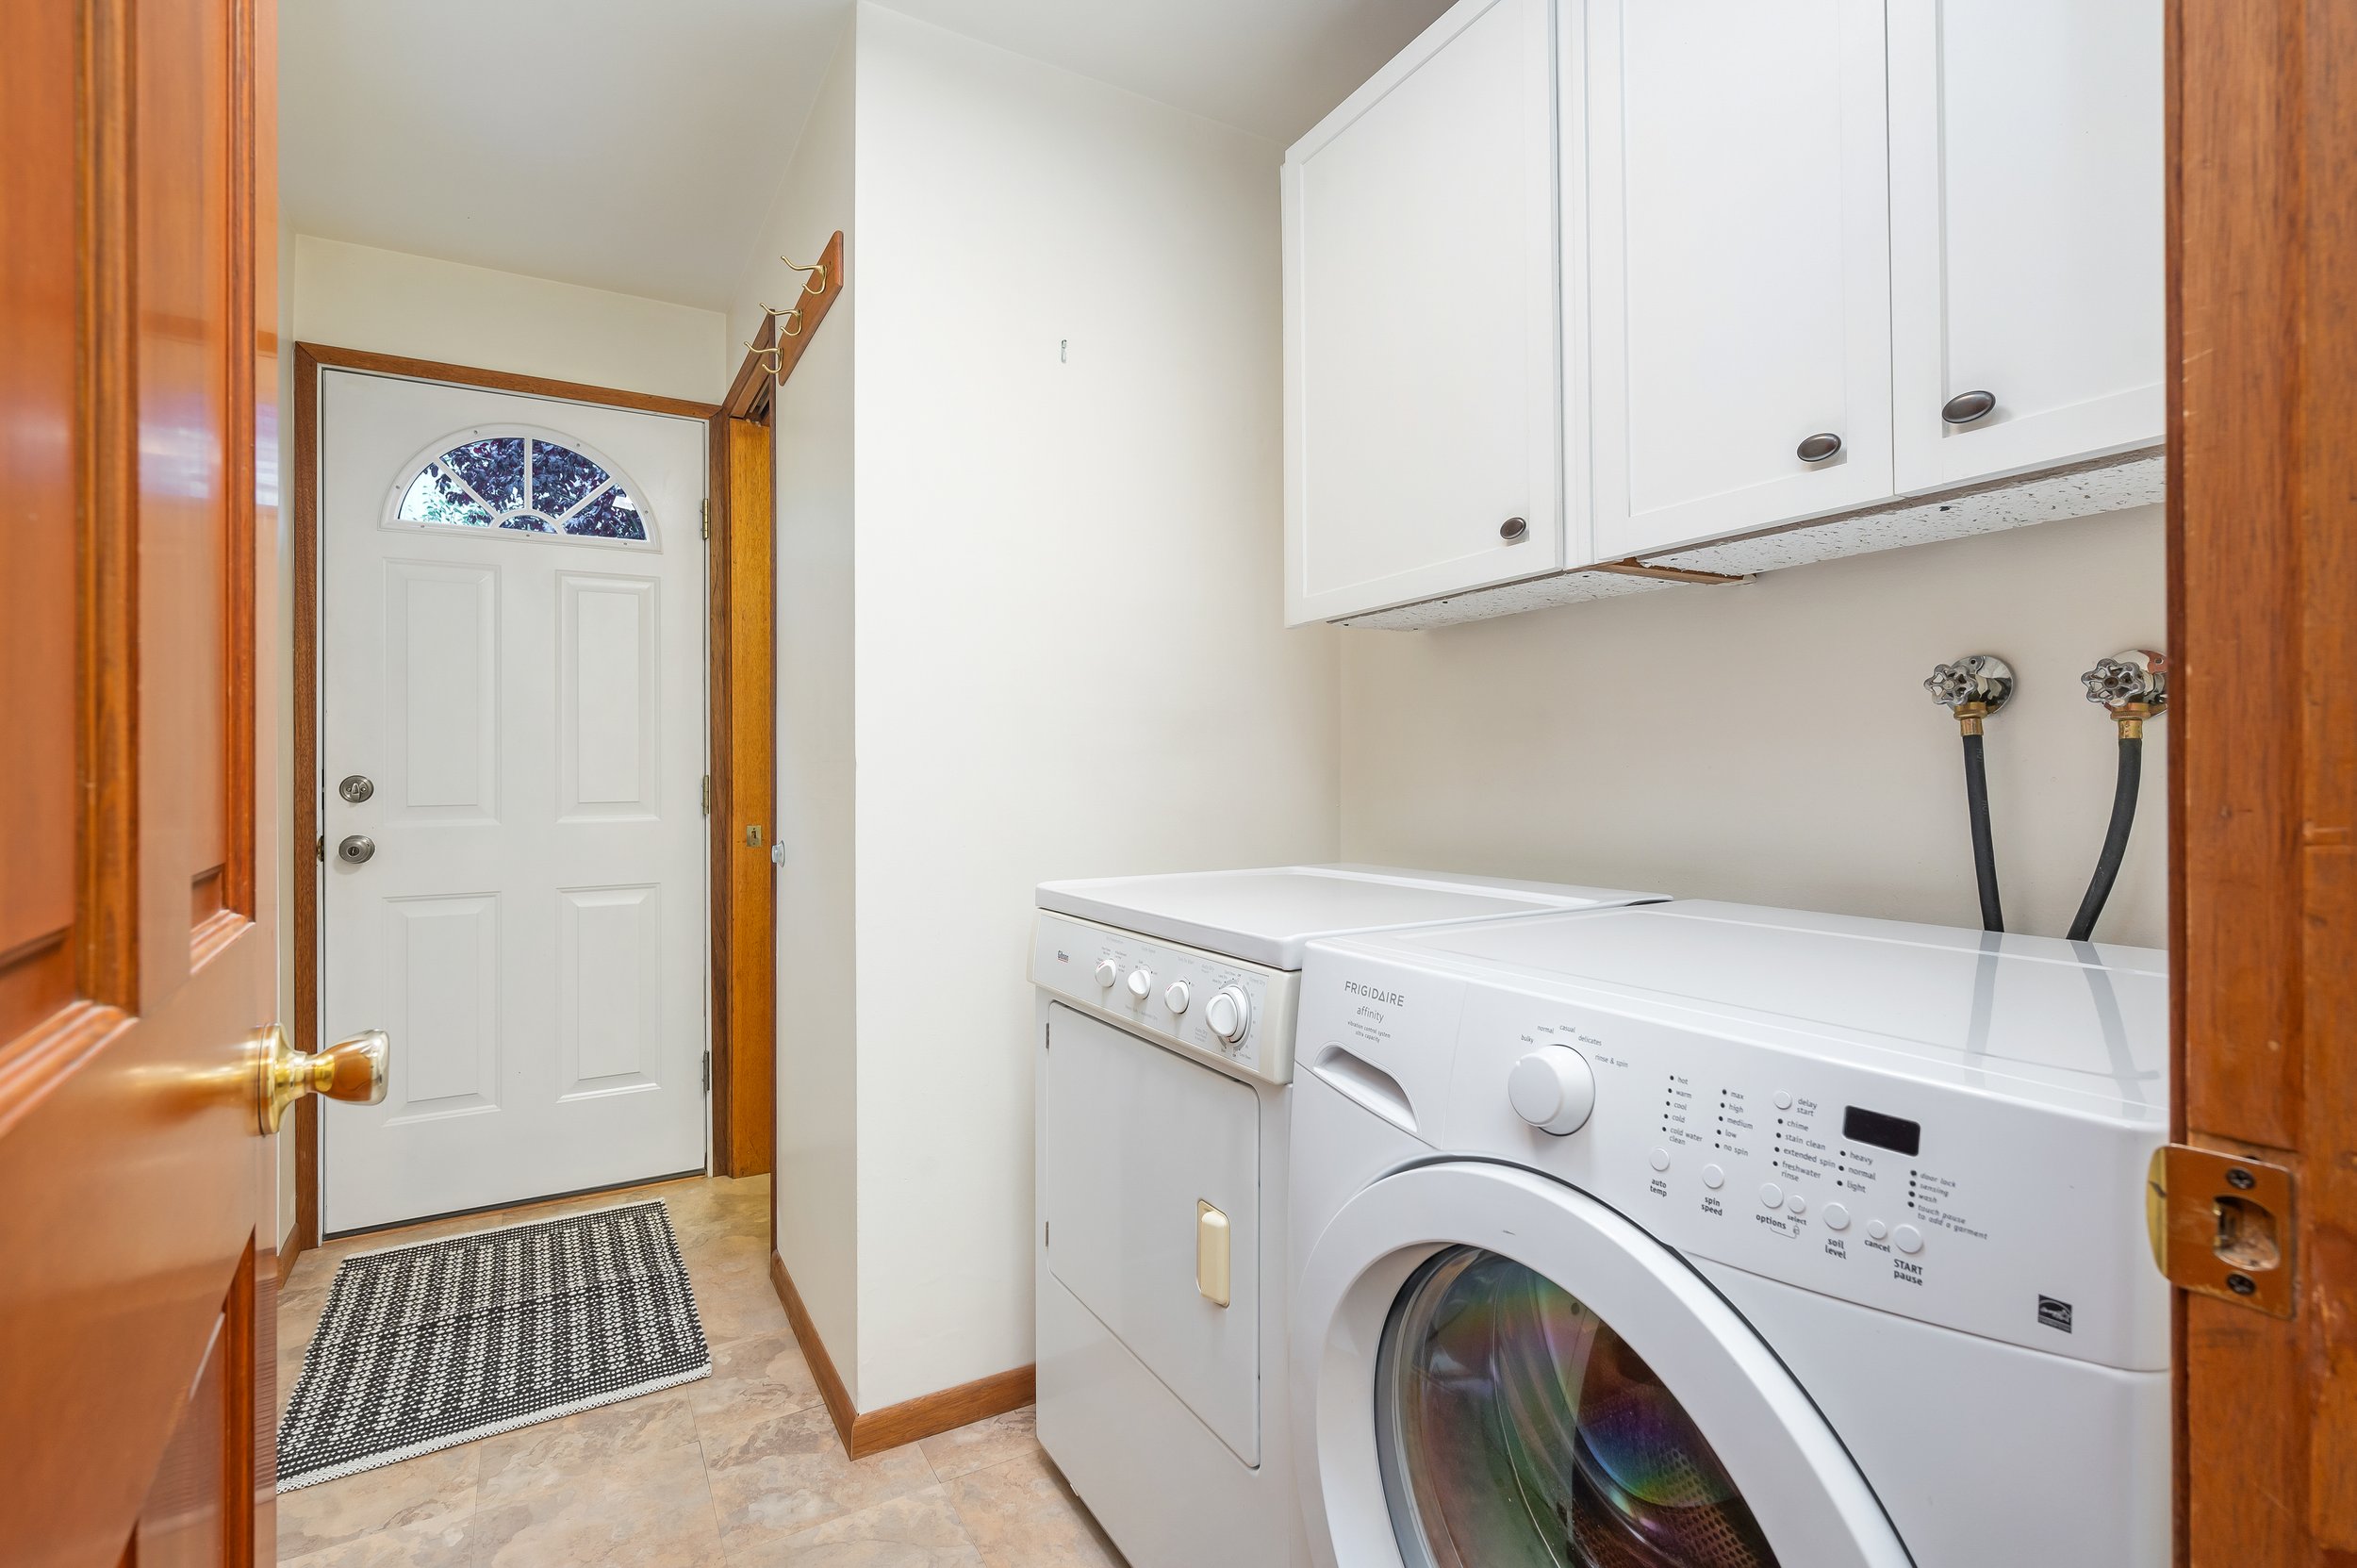  interior of laundry room with washer and dryer and door to yard 